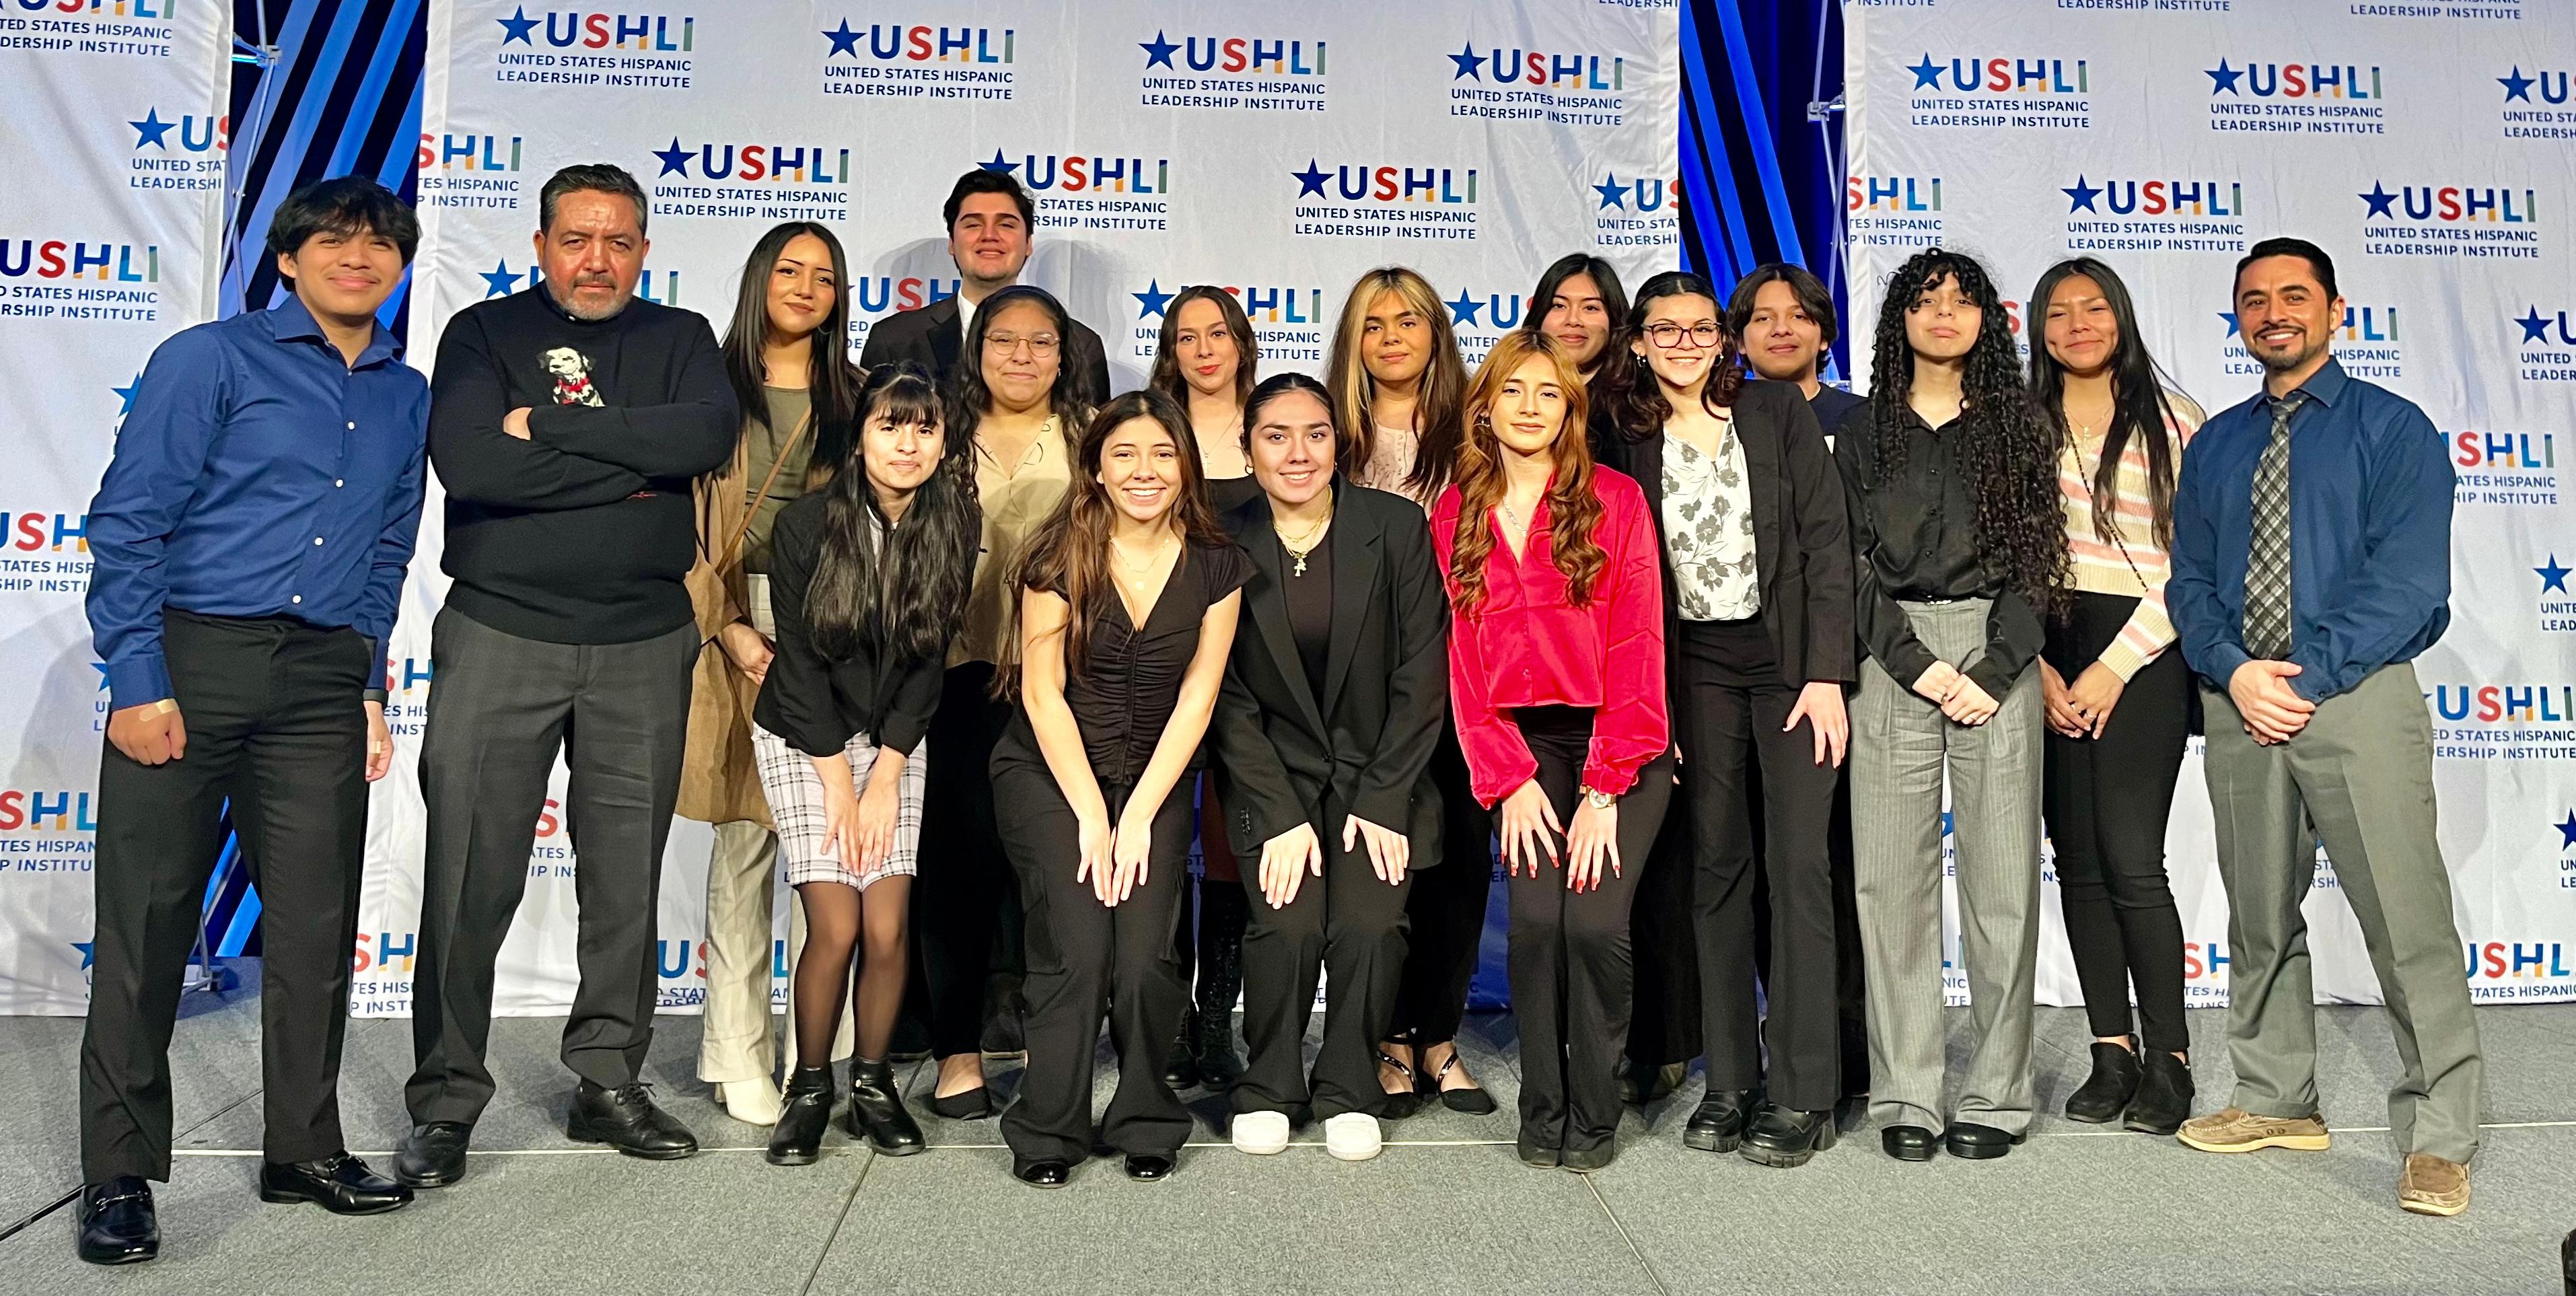 Members of Willowbrook Hispanic Organization for Leadership and Achievement (HOLA) Club attend United States Hispanic Leadership Institute (USHLI) National Conference 